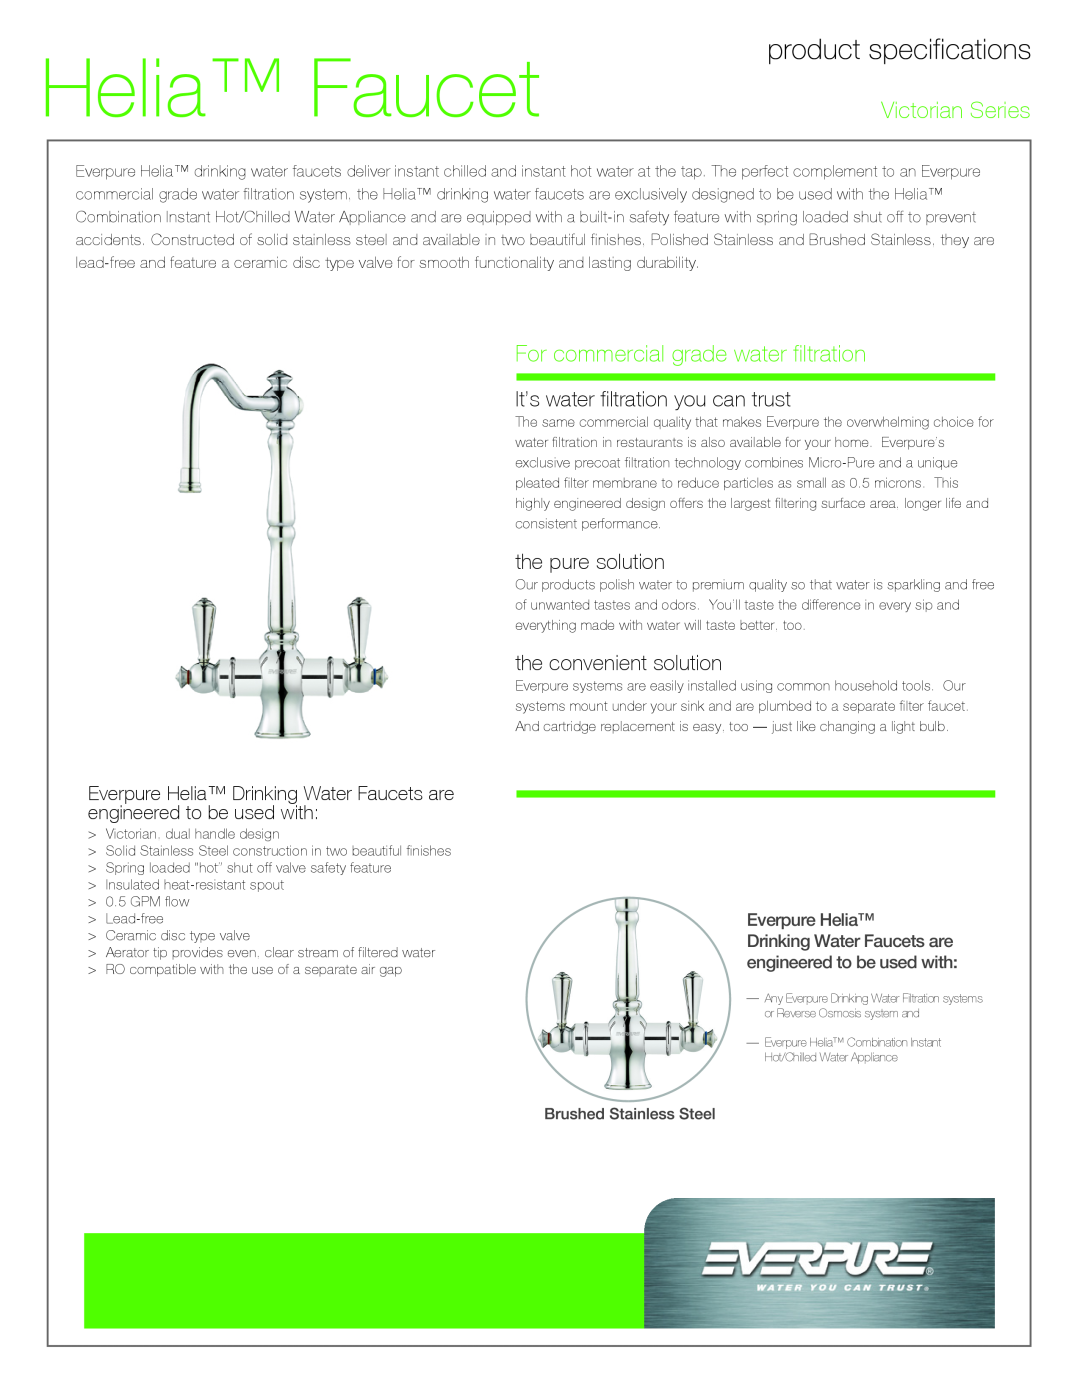 Everpure EV9006-21 manual Helia Faucet, Victorian Series, For commercial grade water filtration, the pure solution 